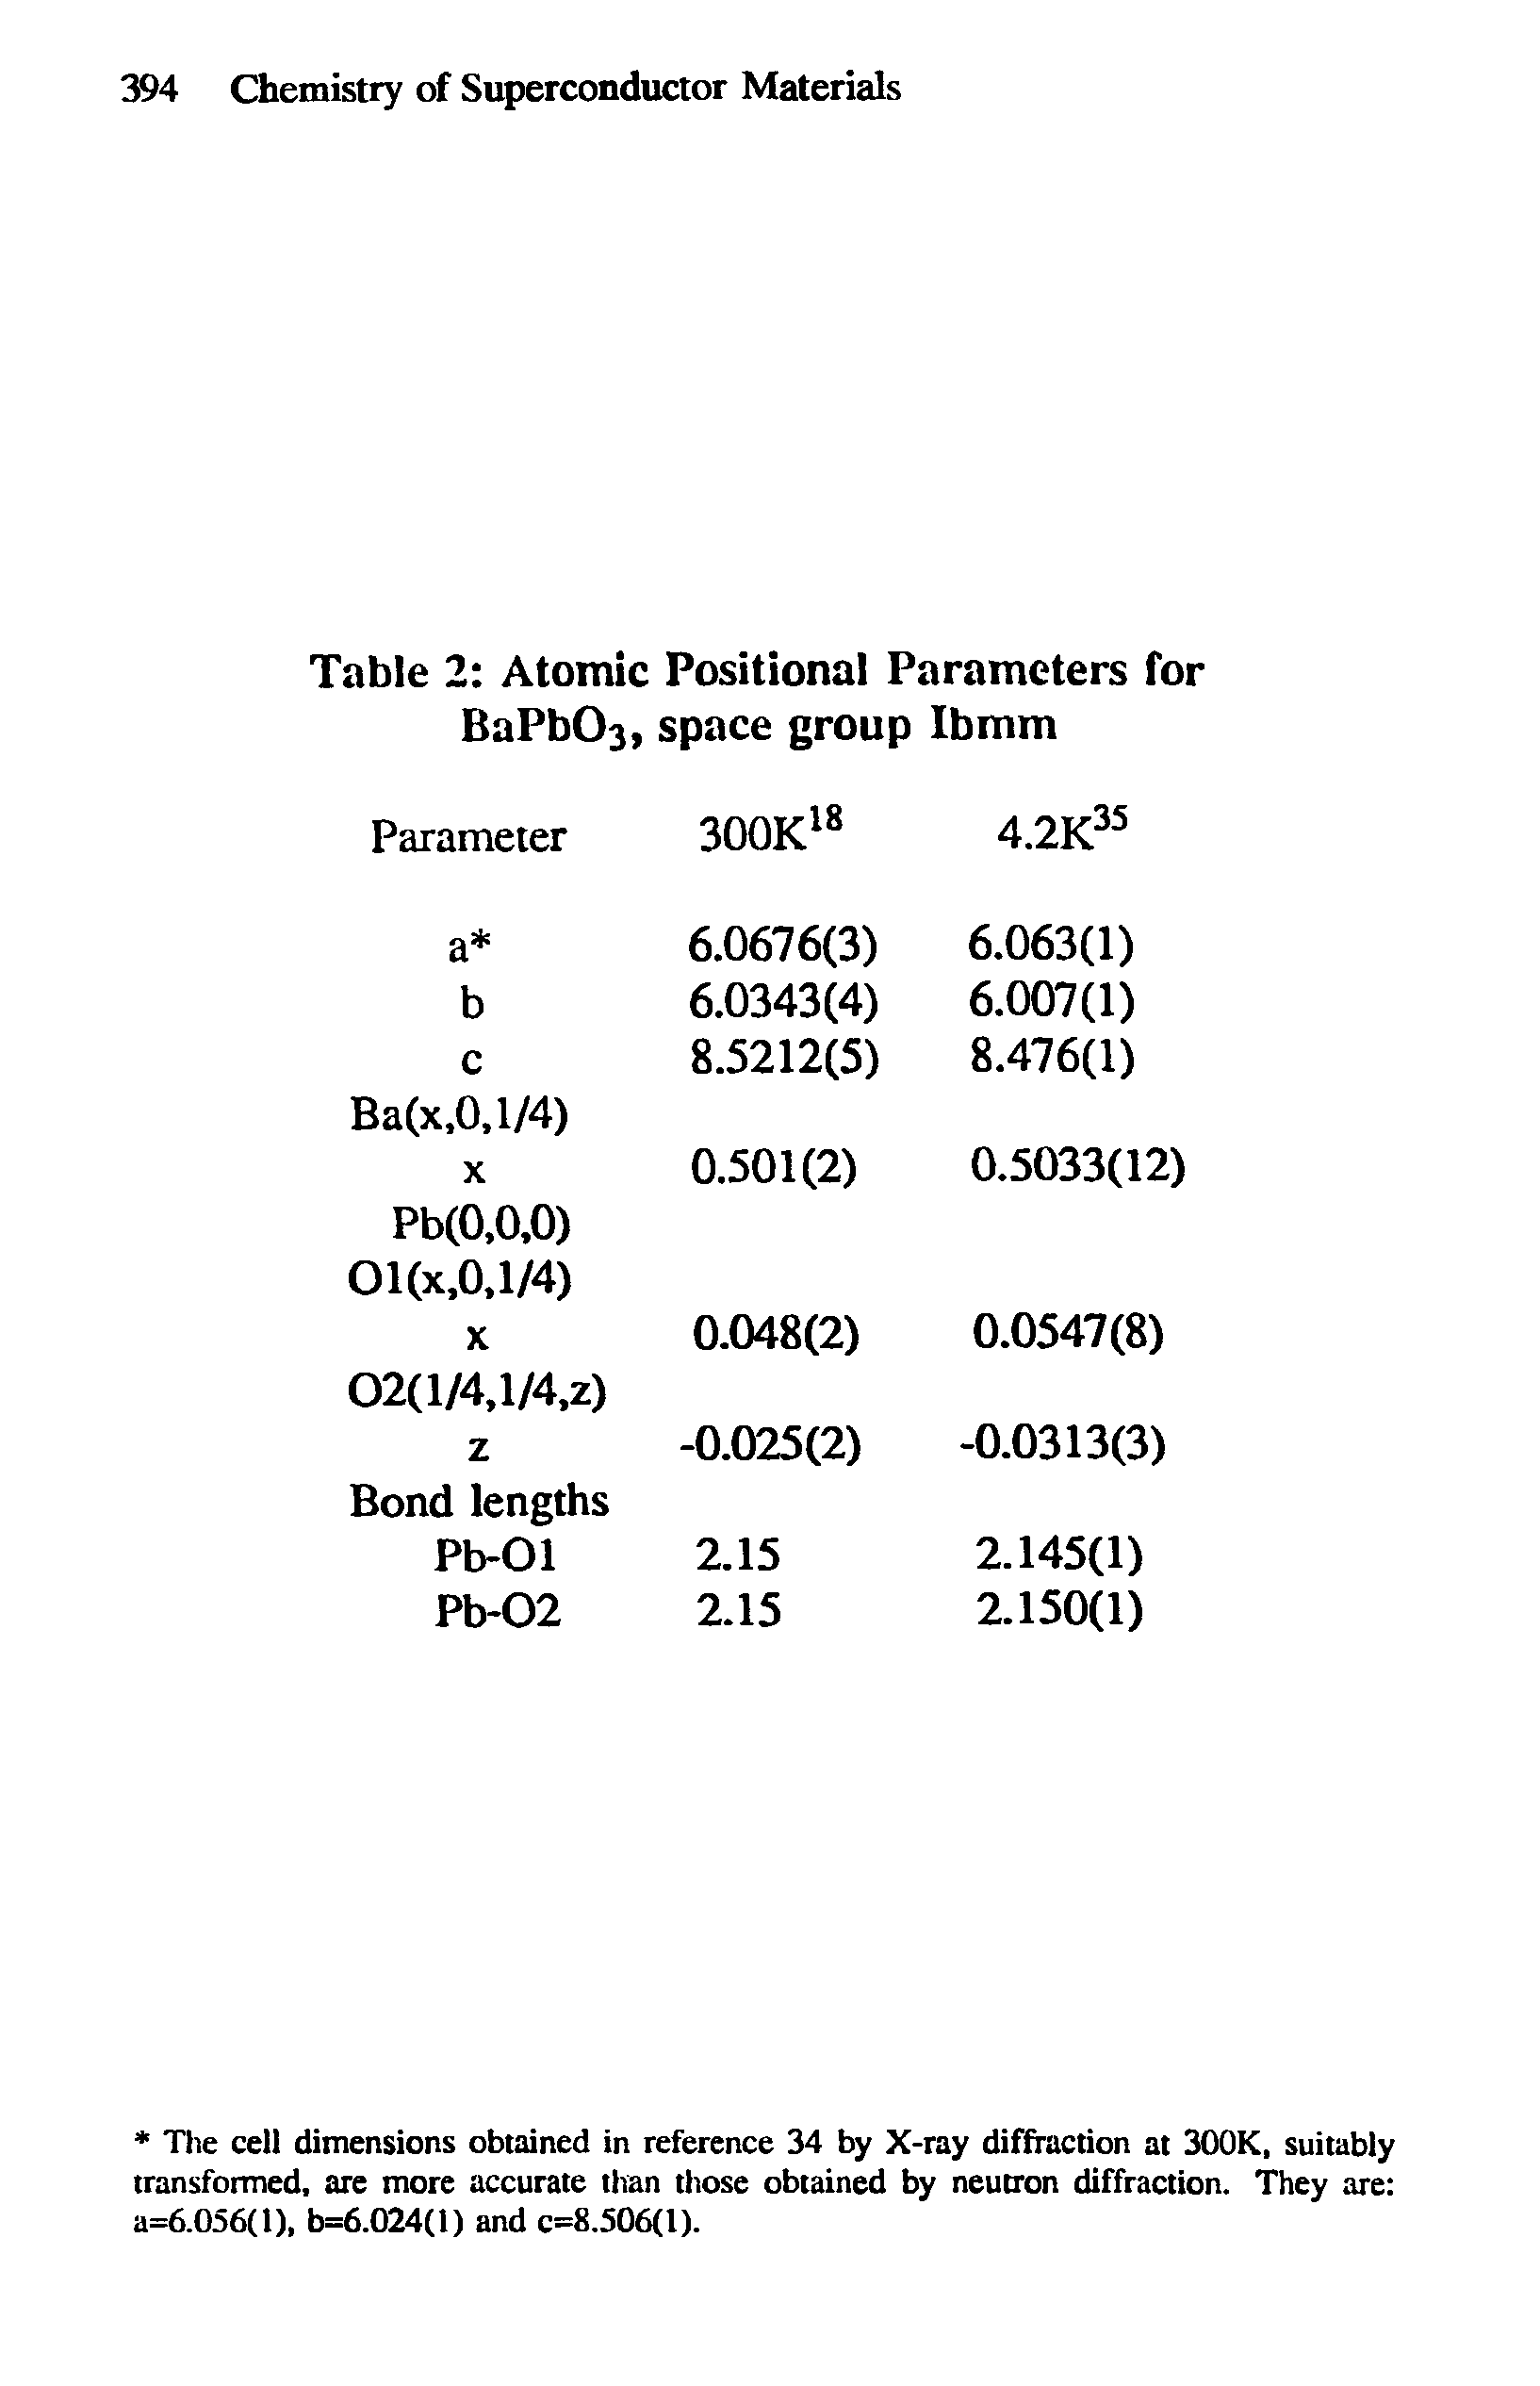 Table 2 Atomic Positional Parameters for BaPb03, space group Ibmm...